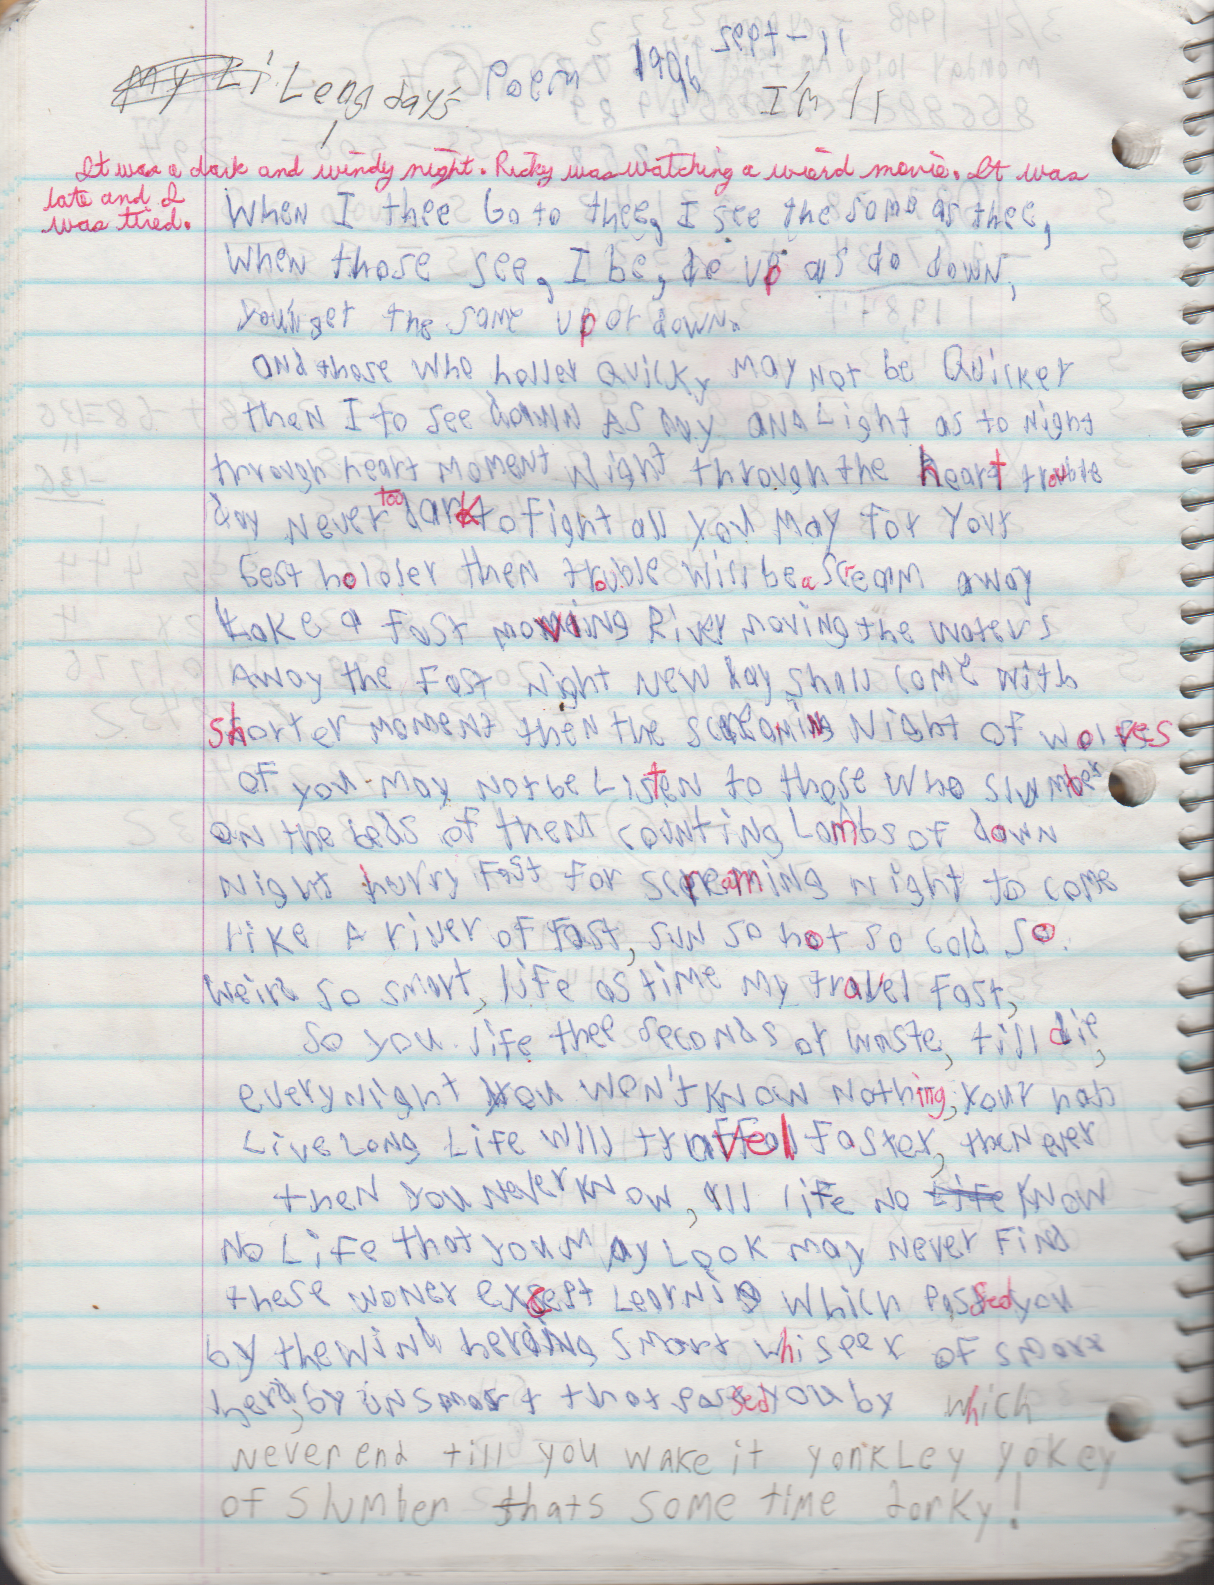 1996-08-18 - Saturday - 11 yr old Joey Arnold's School Book, dates through to 1998 apx, mostly 96, Writings, Drawings, Etc-046.png